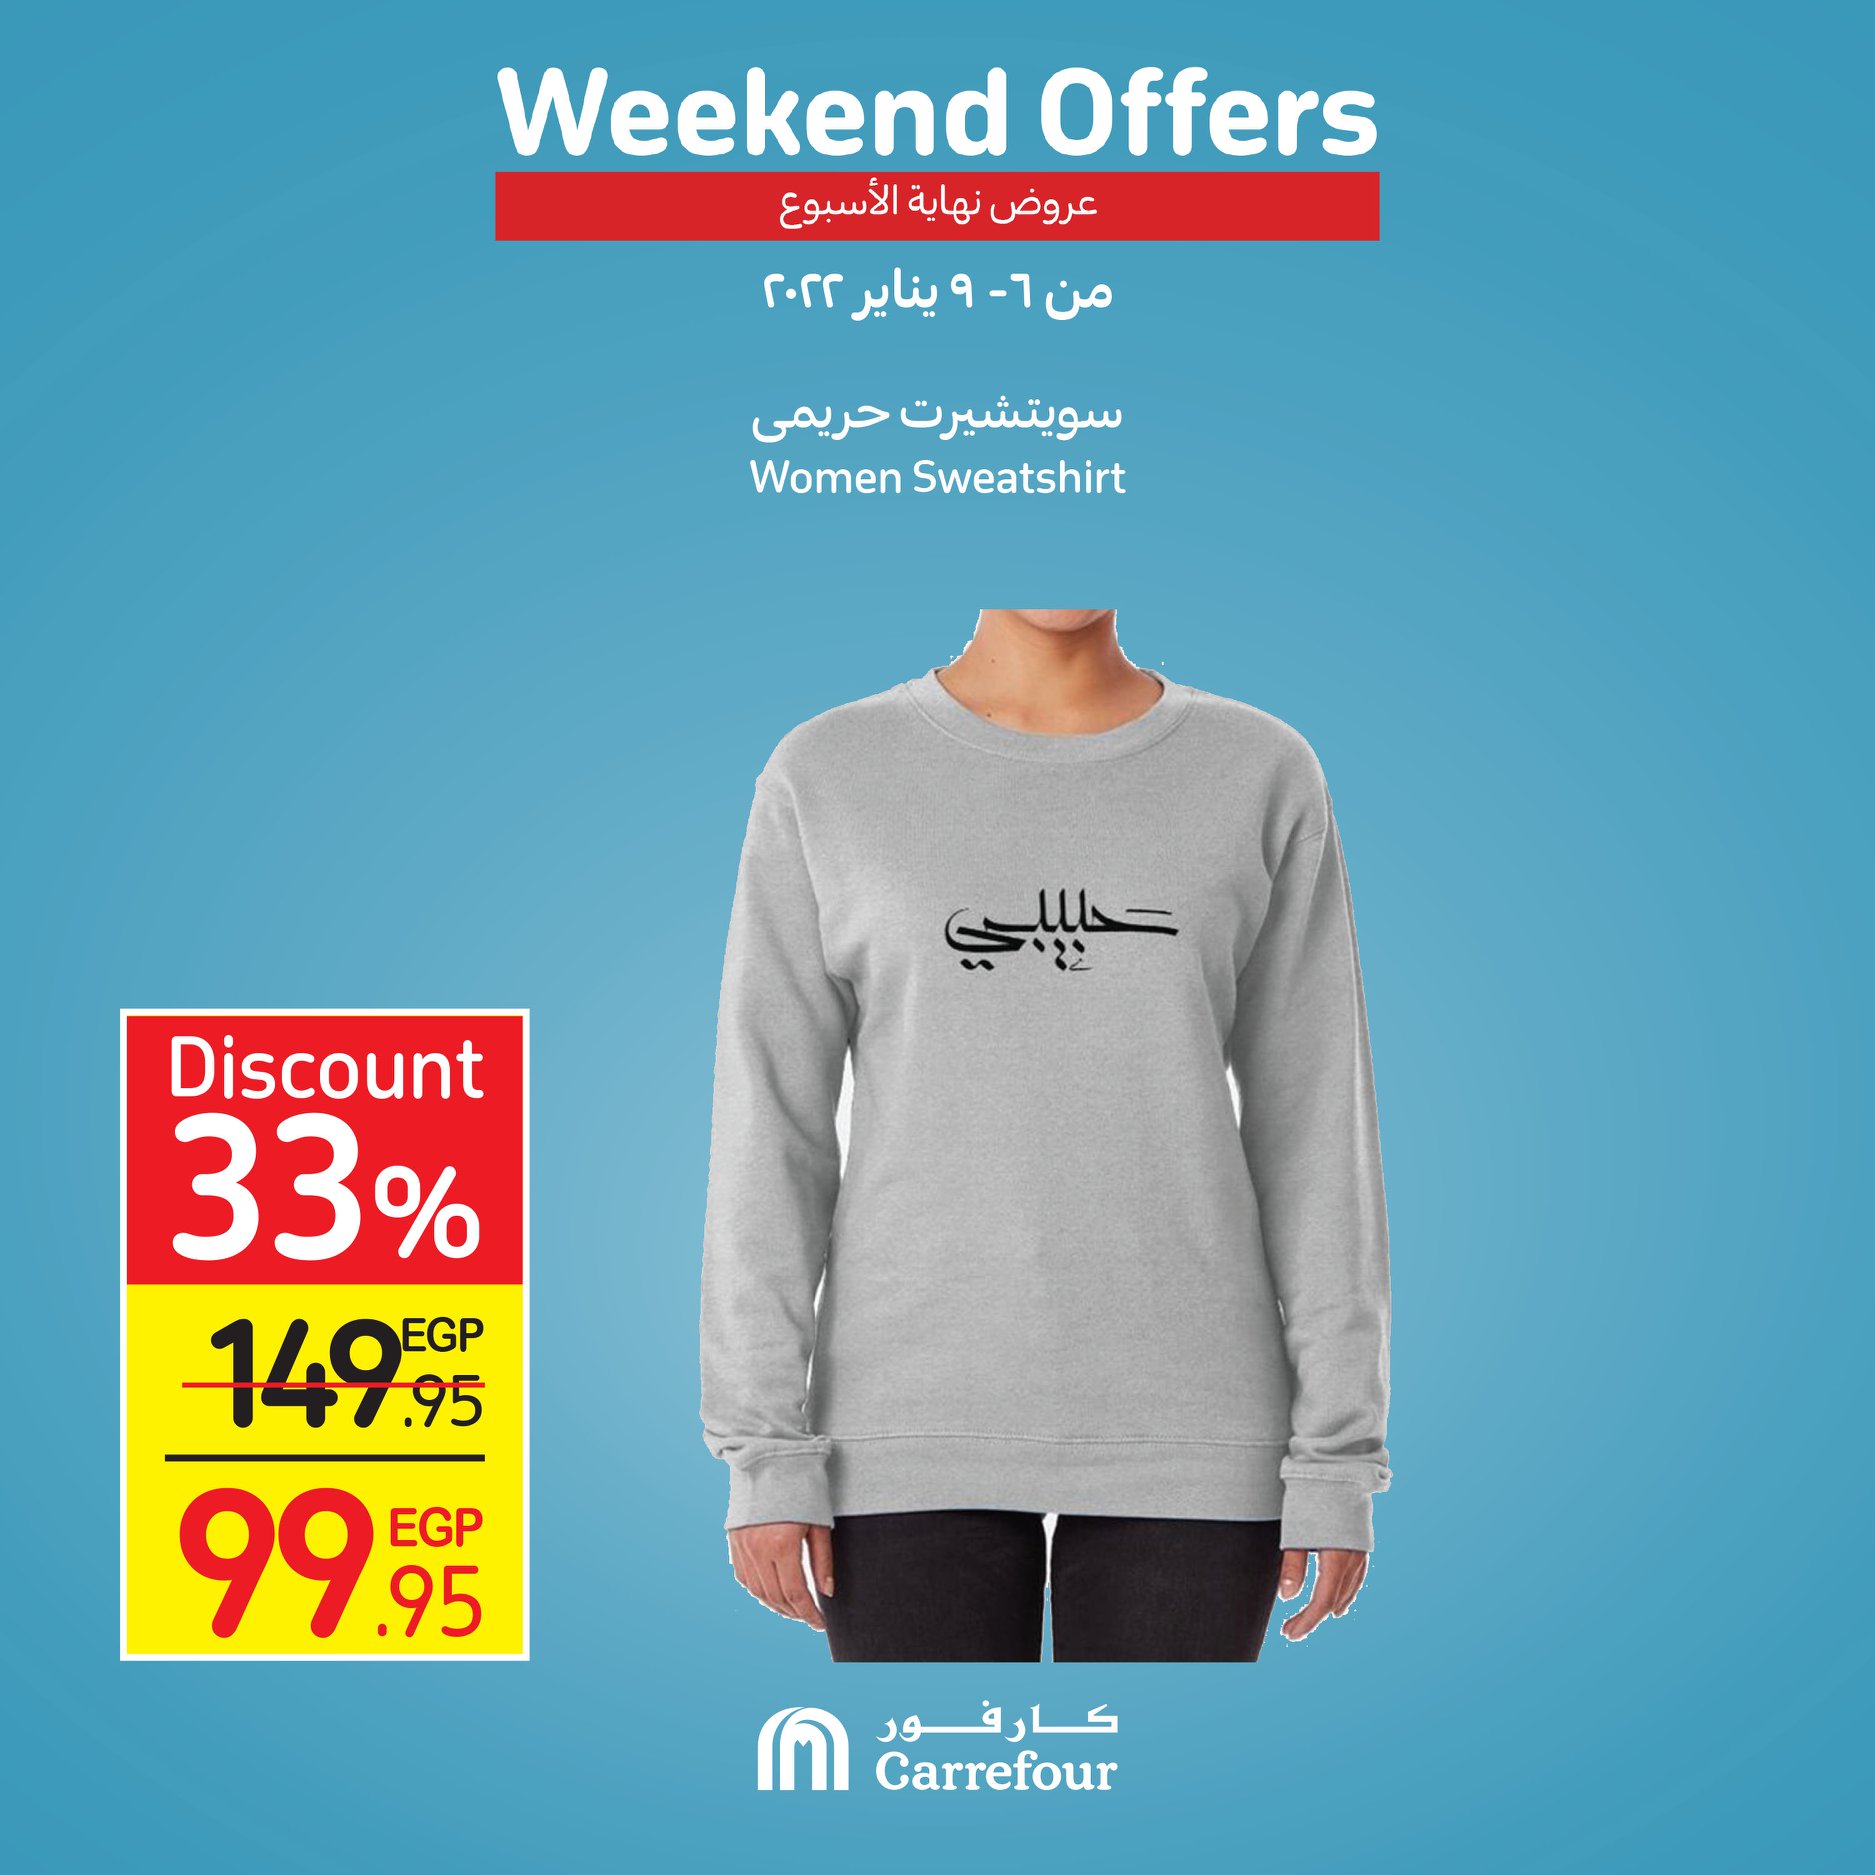 Now, the strongest offers and surprises from Carrefour, half-price discounts, at Weekend until January 16th, 46